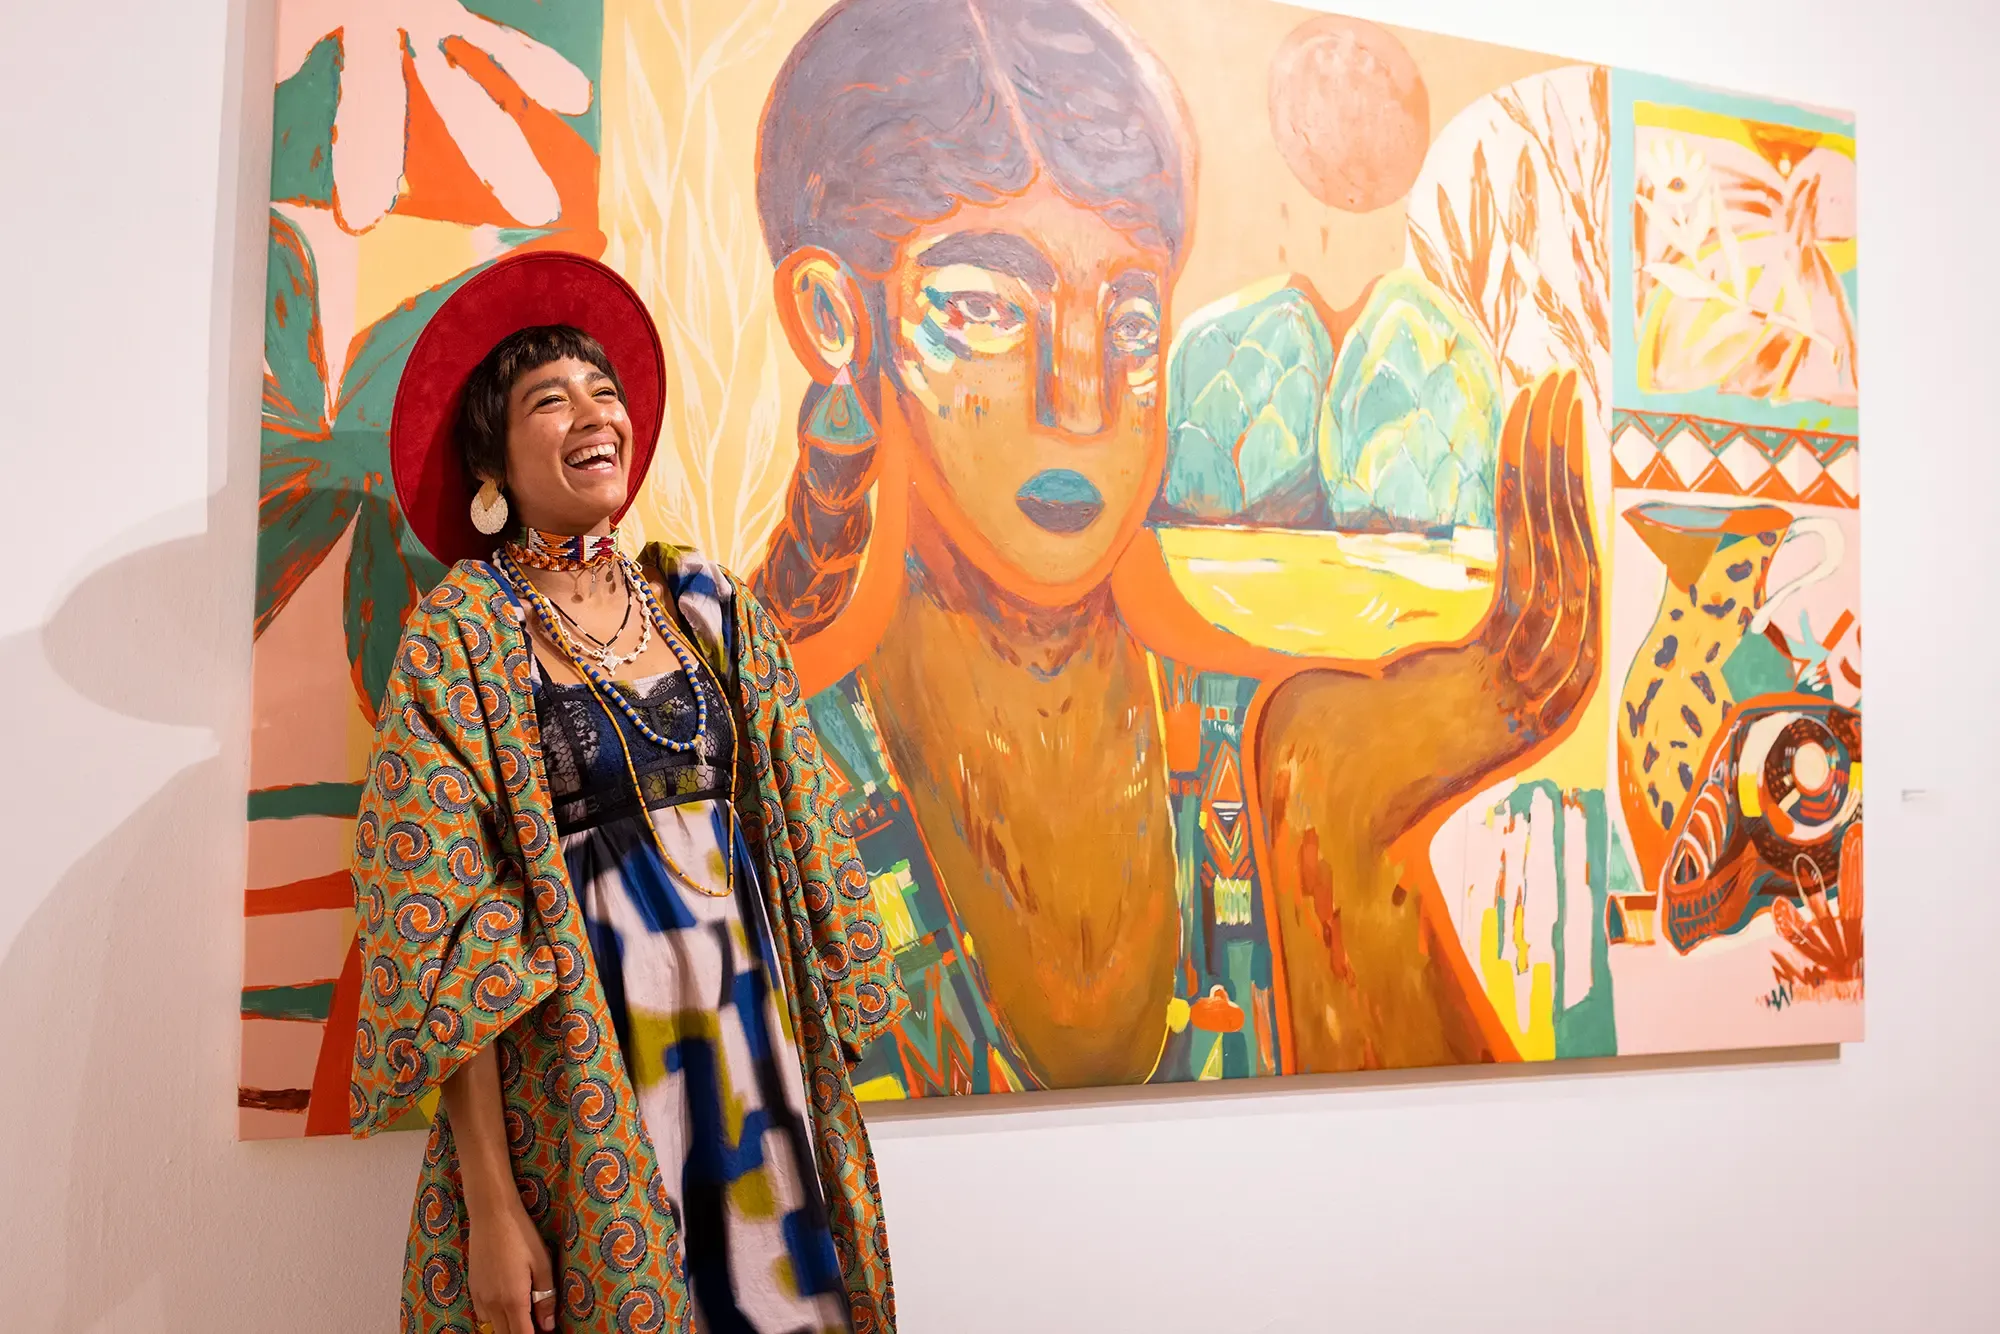 jumu monster, promising contemporary artist, in front of a Hughe painting, colorful, ancient latin America, storytelling